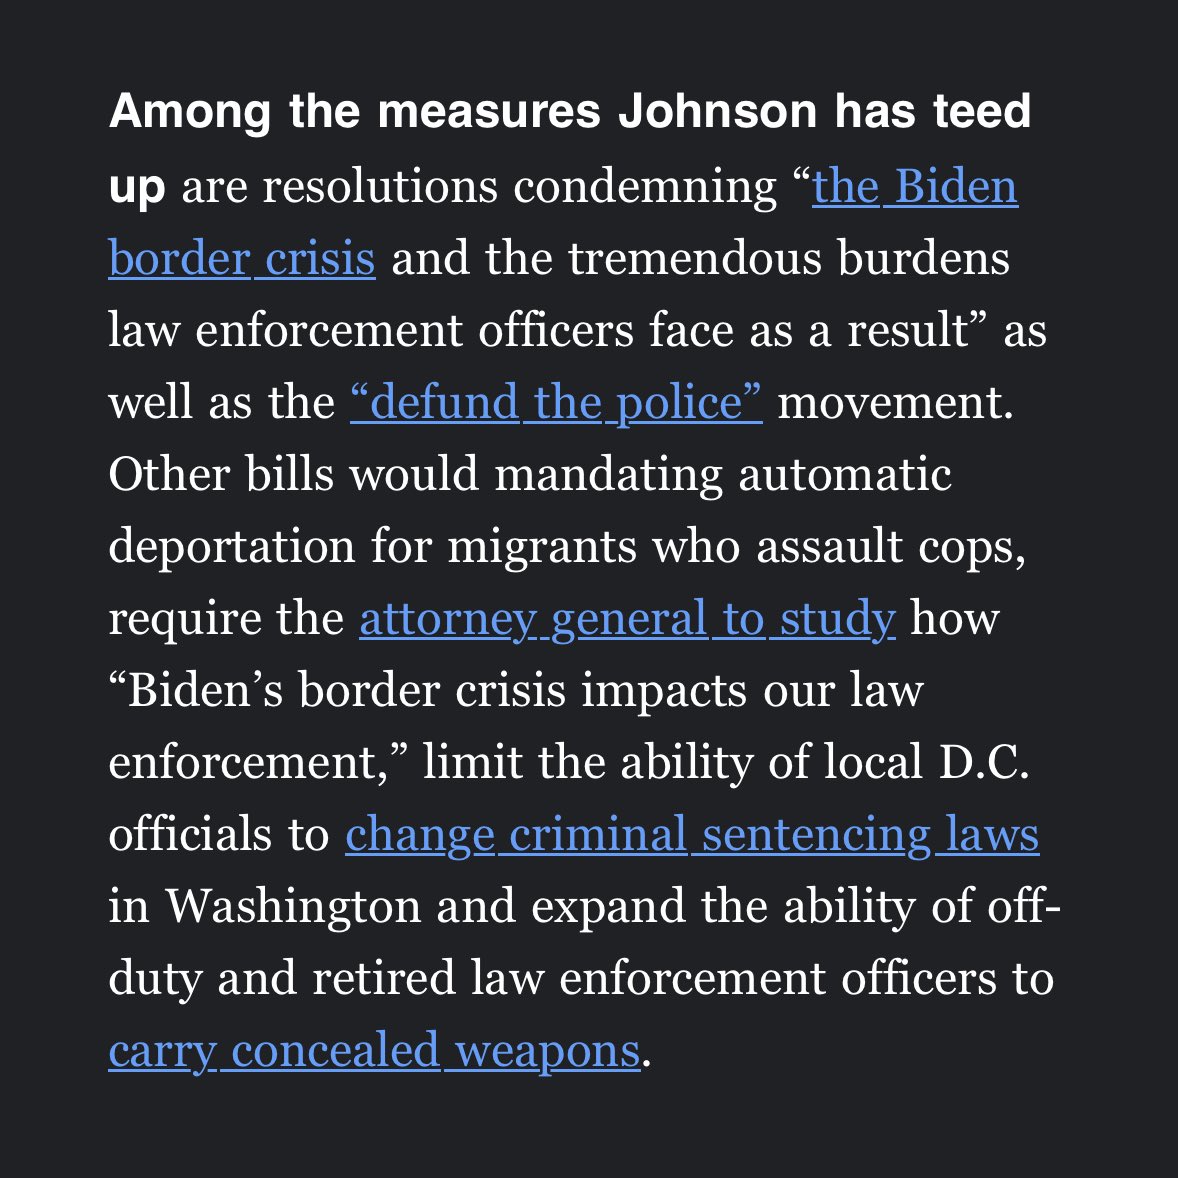 Per Playbook, House Republicans are about to pretend to be pro-law enforcement — but don’t forget: They killed a bipartisan border bill to add security officers They voted to “defund the police” by cutting COPS funding And they defend Jan. 6 rioters who attacked Capitol police